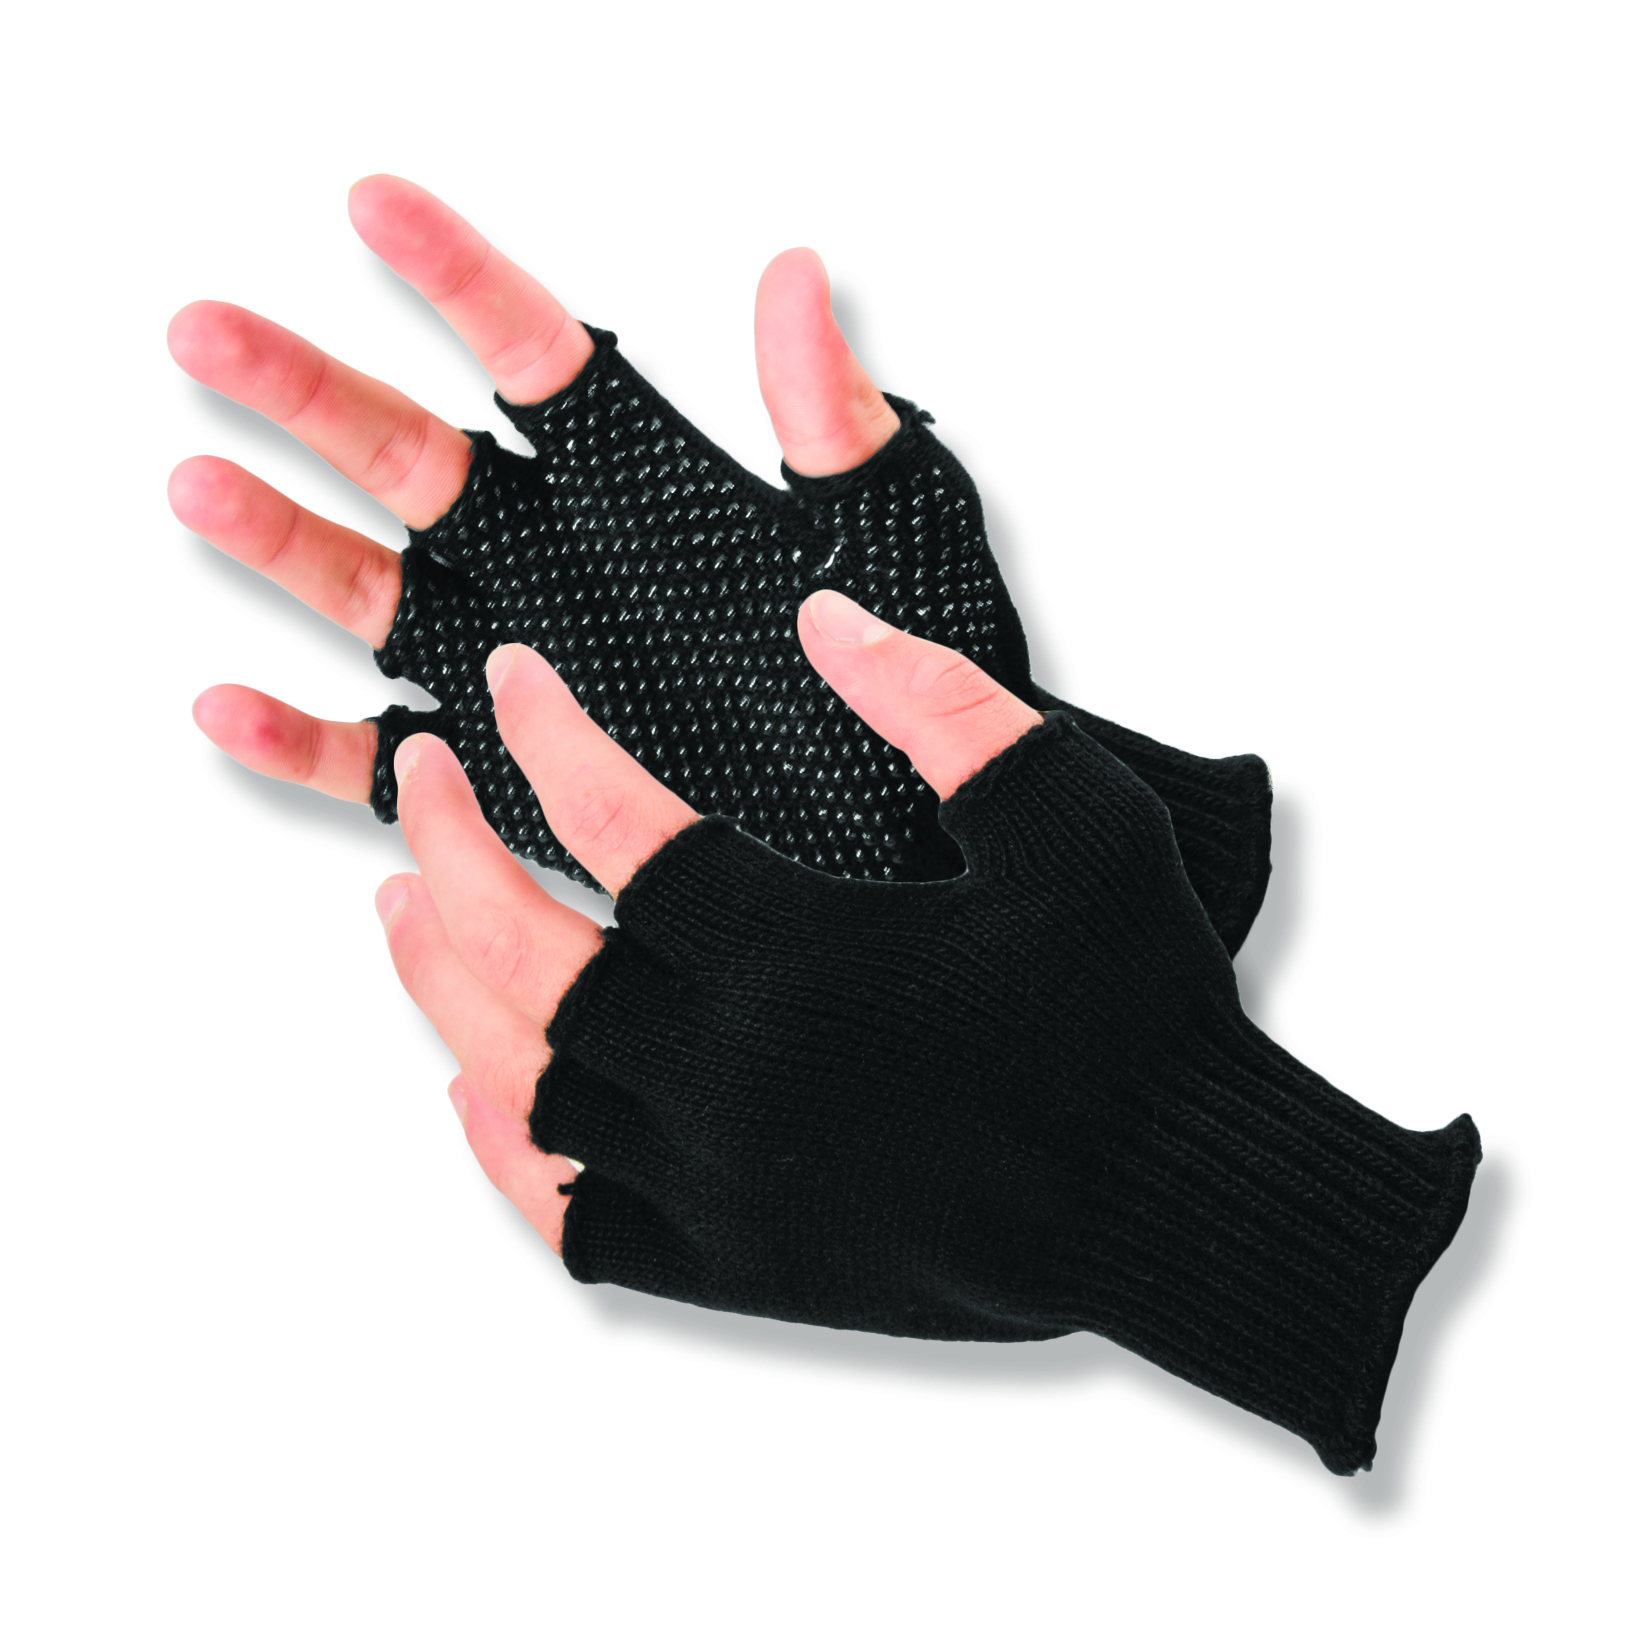 Details about   Nert Pow winter gloves black L nonslip grop on palm and fingers 